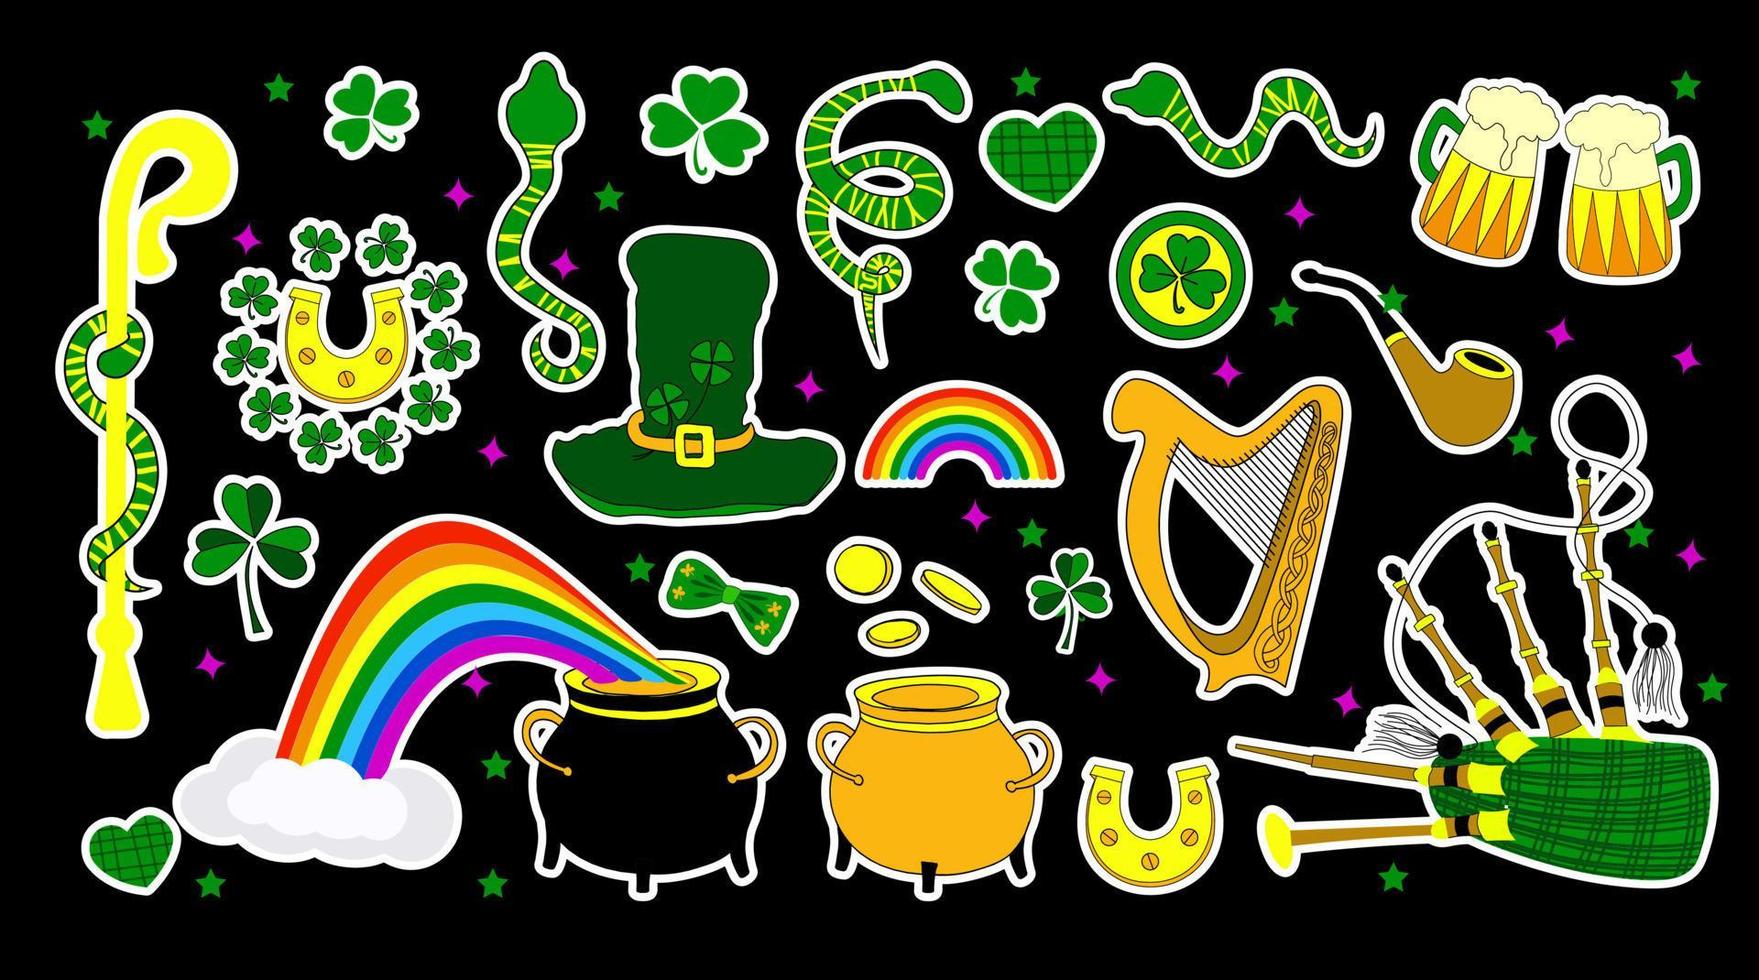 St. Patrick's Day stickers. Set of elements for Patrick's day isolated. Leprechaun hat, harp and clover leaves. Be happy. Horseshoe and shamrock vector